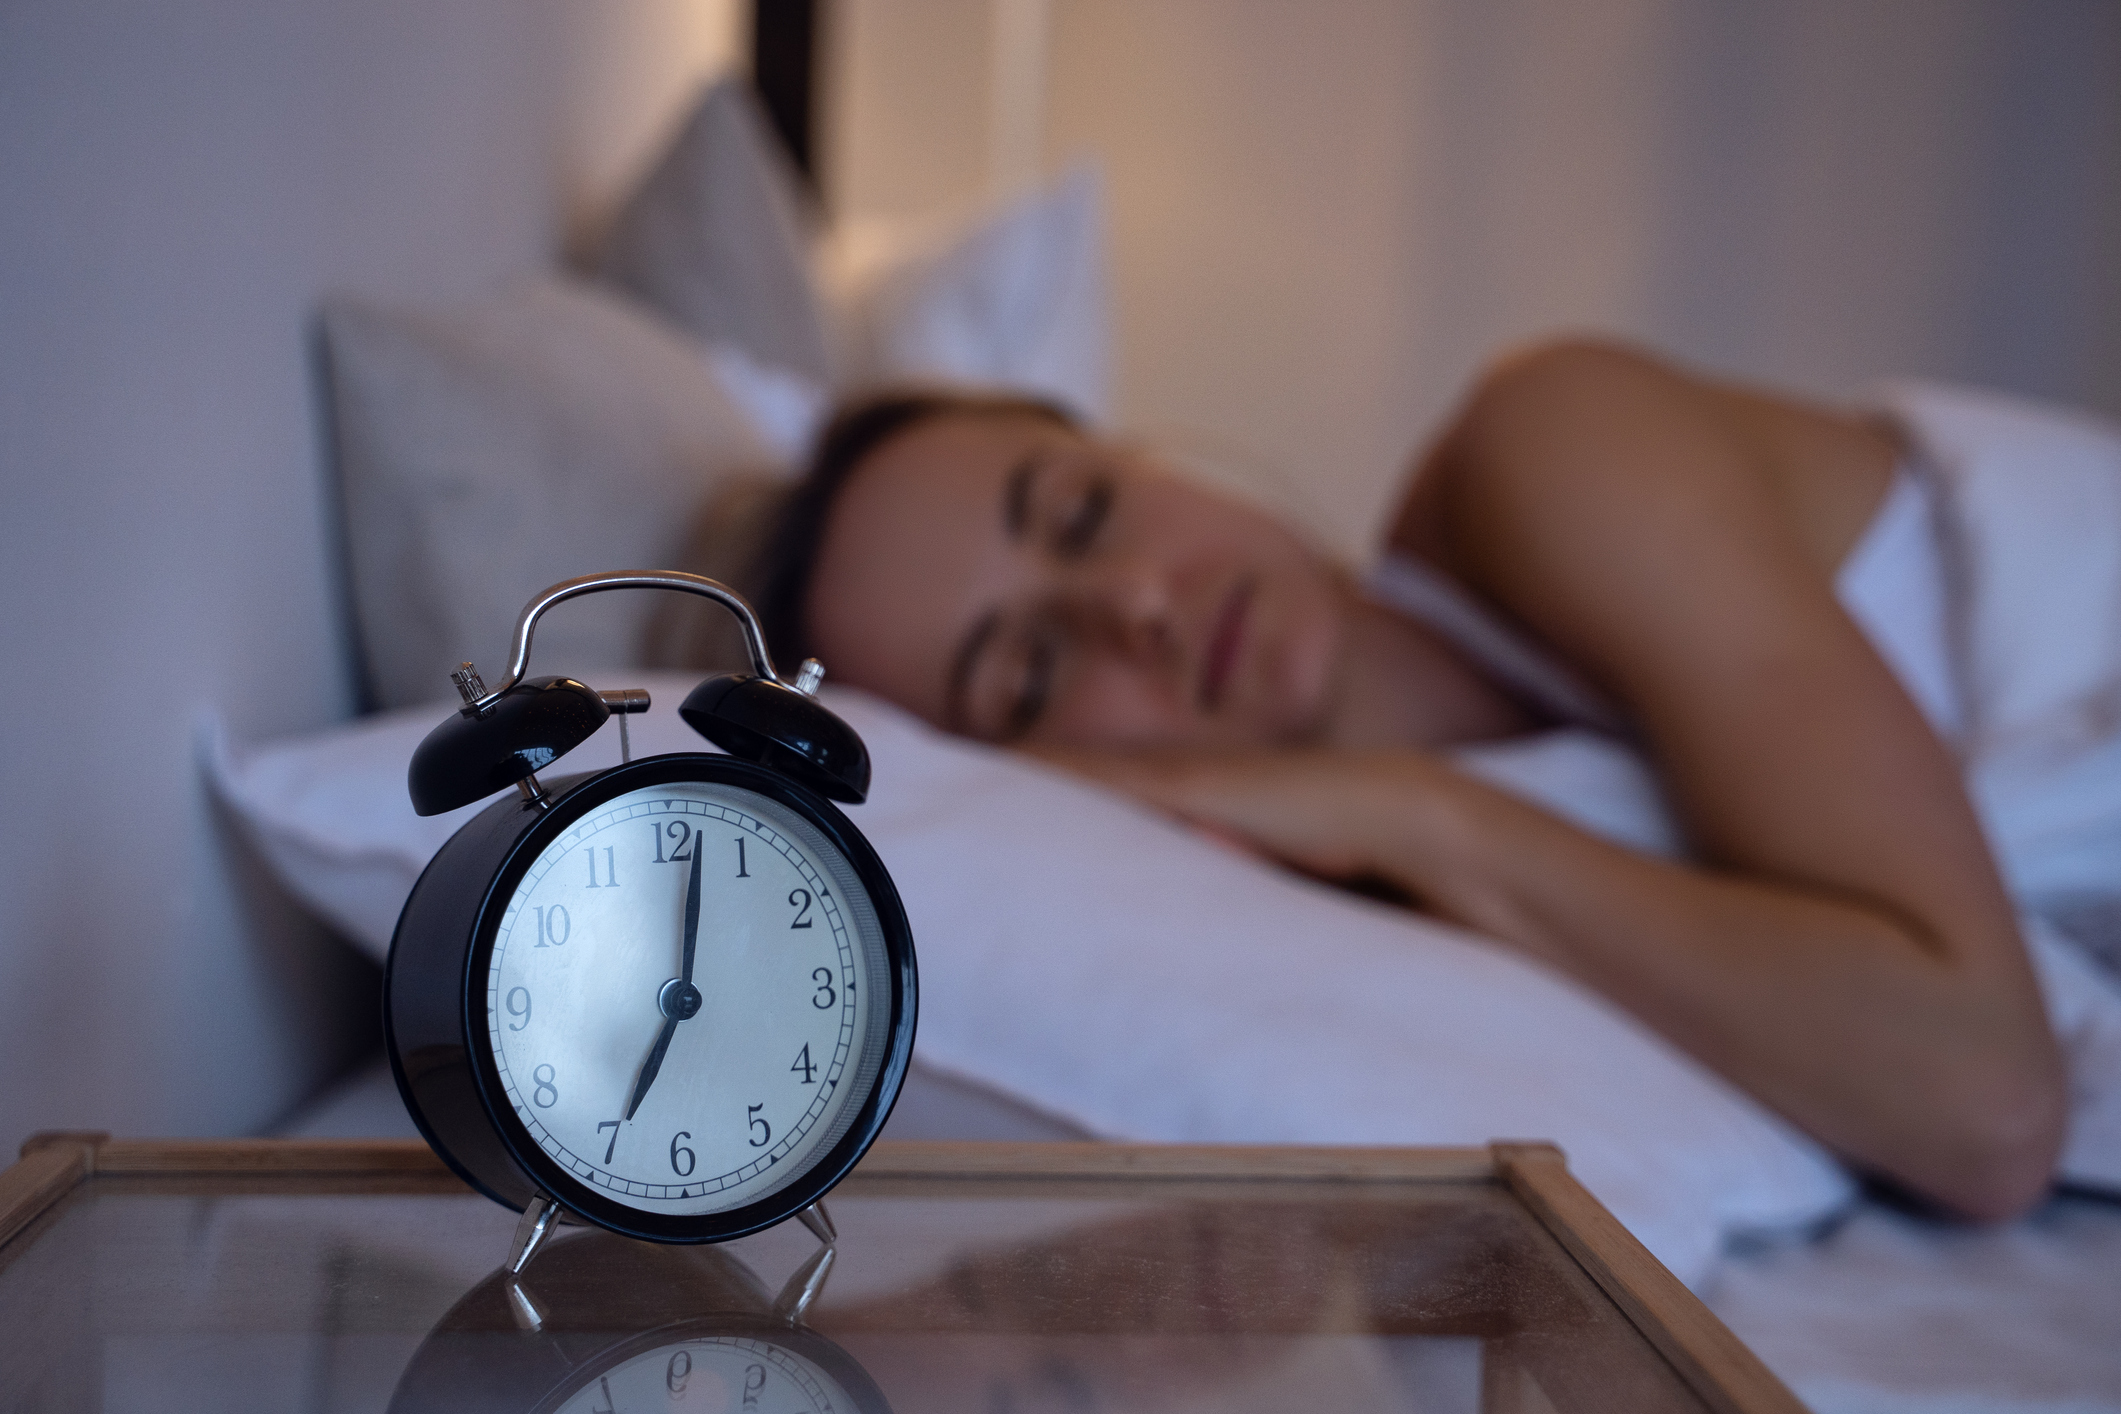 Sleeping in on weekends can seriously hurt your health